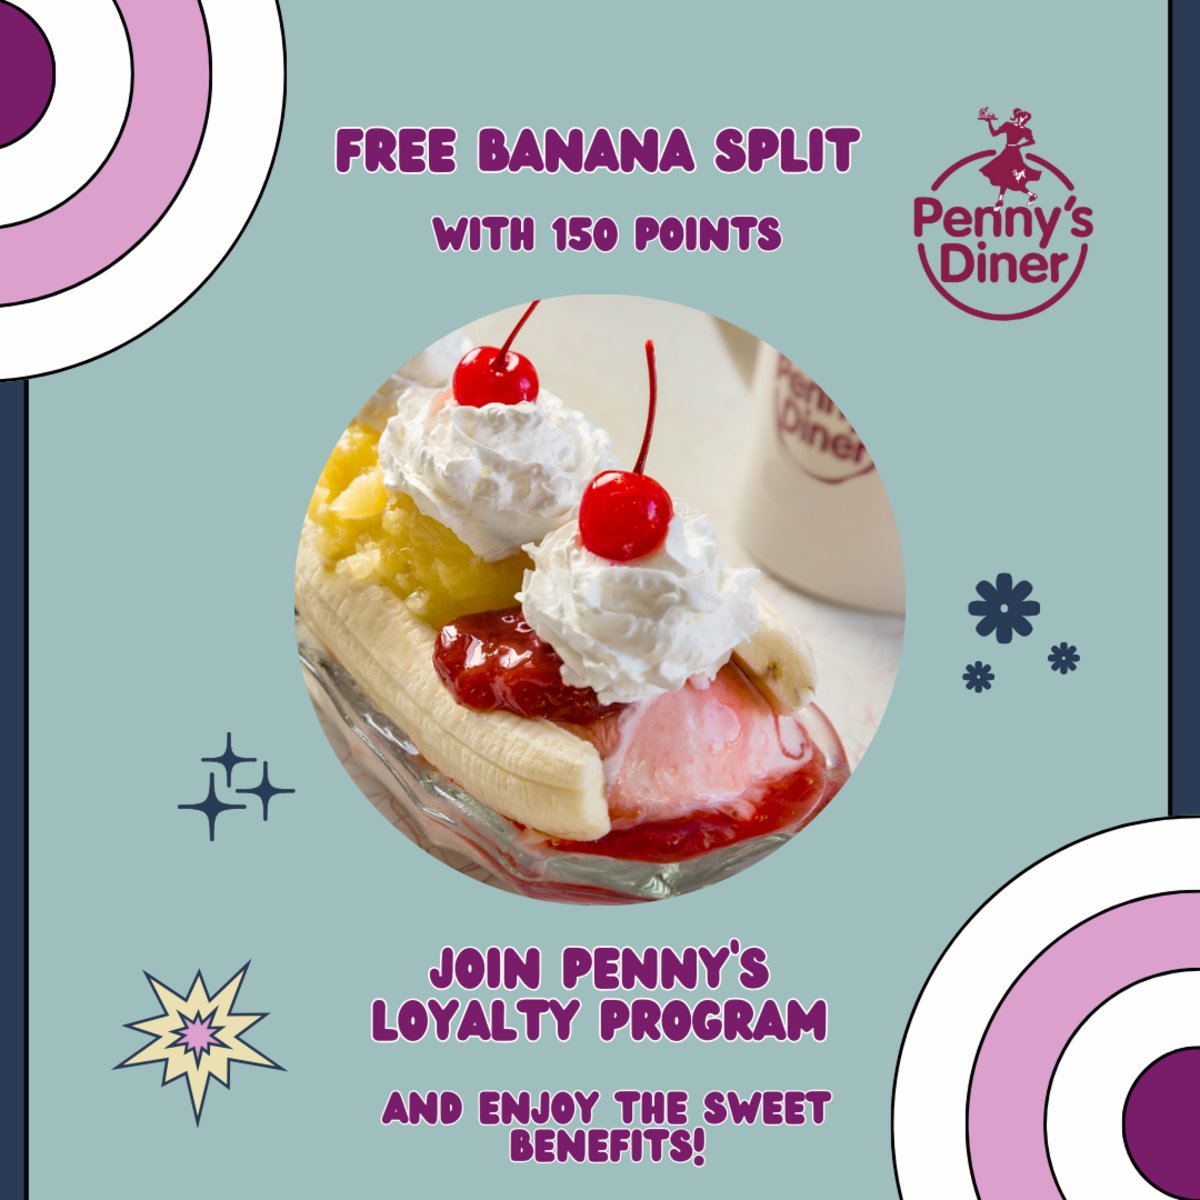 Isn't it about time you got your just #desserts? Well, now you can when you join our #LoyaltyProgram! Earn two points for every dollar you spend at Penny's Diner Vaughn and redeem your points for sweet rewards, like a free #bananasplit!